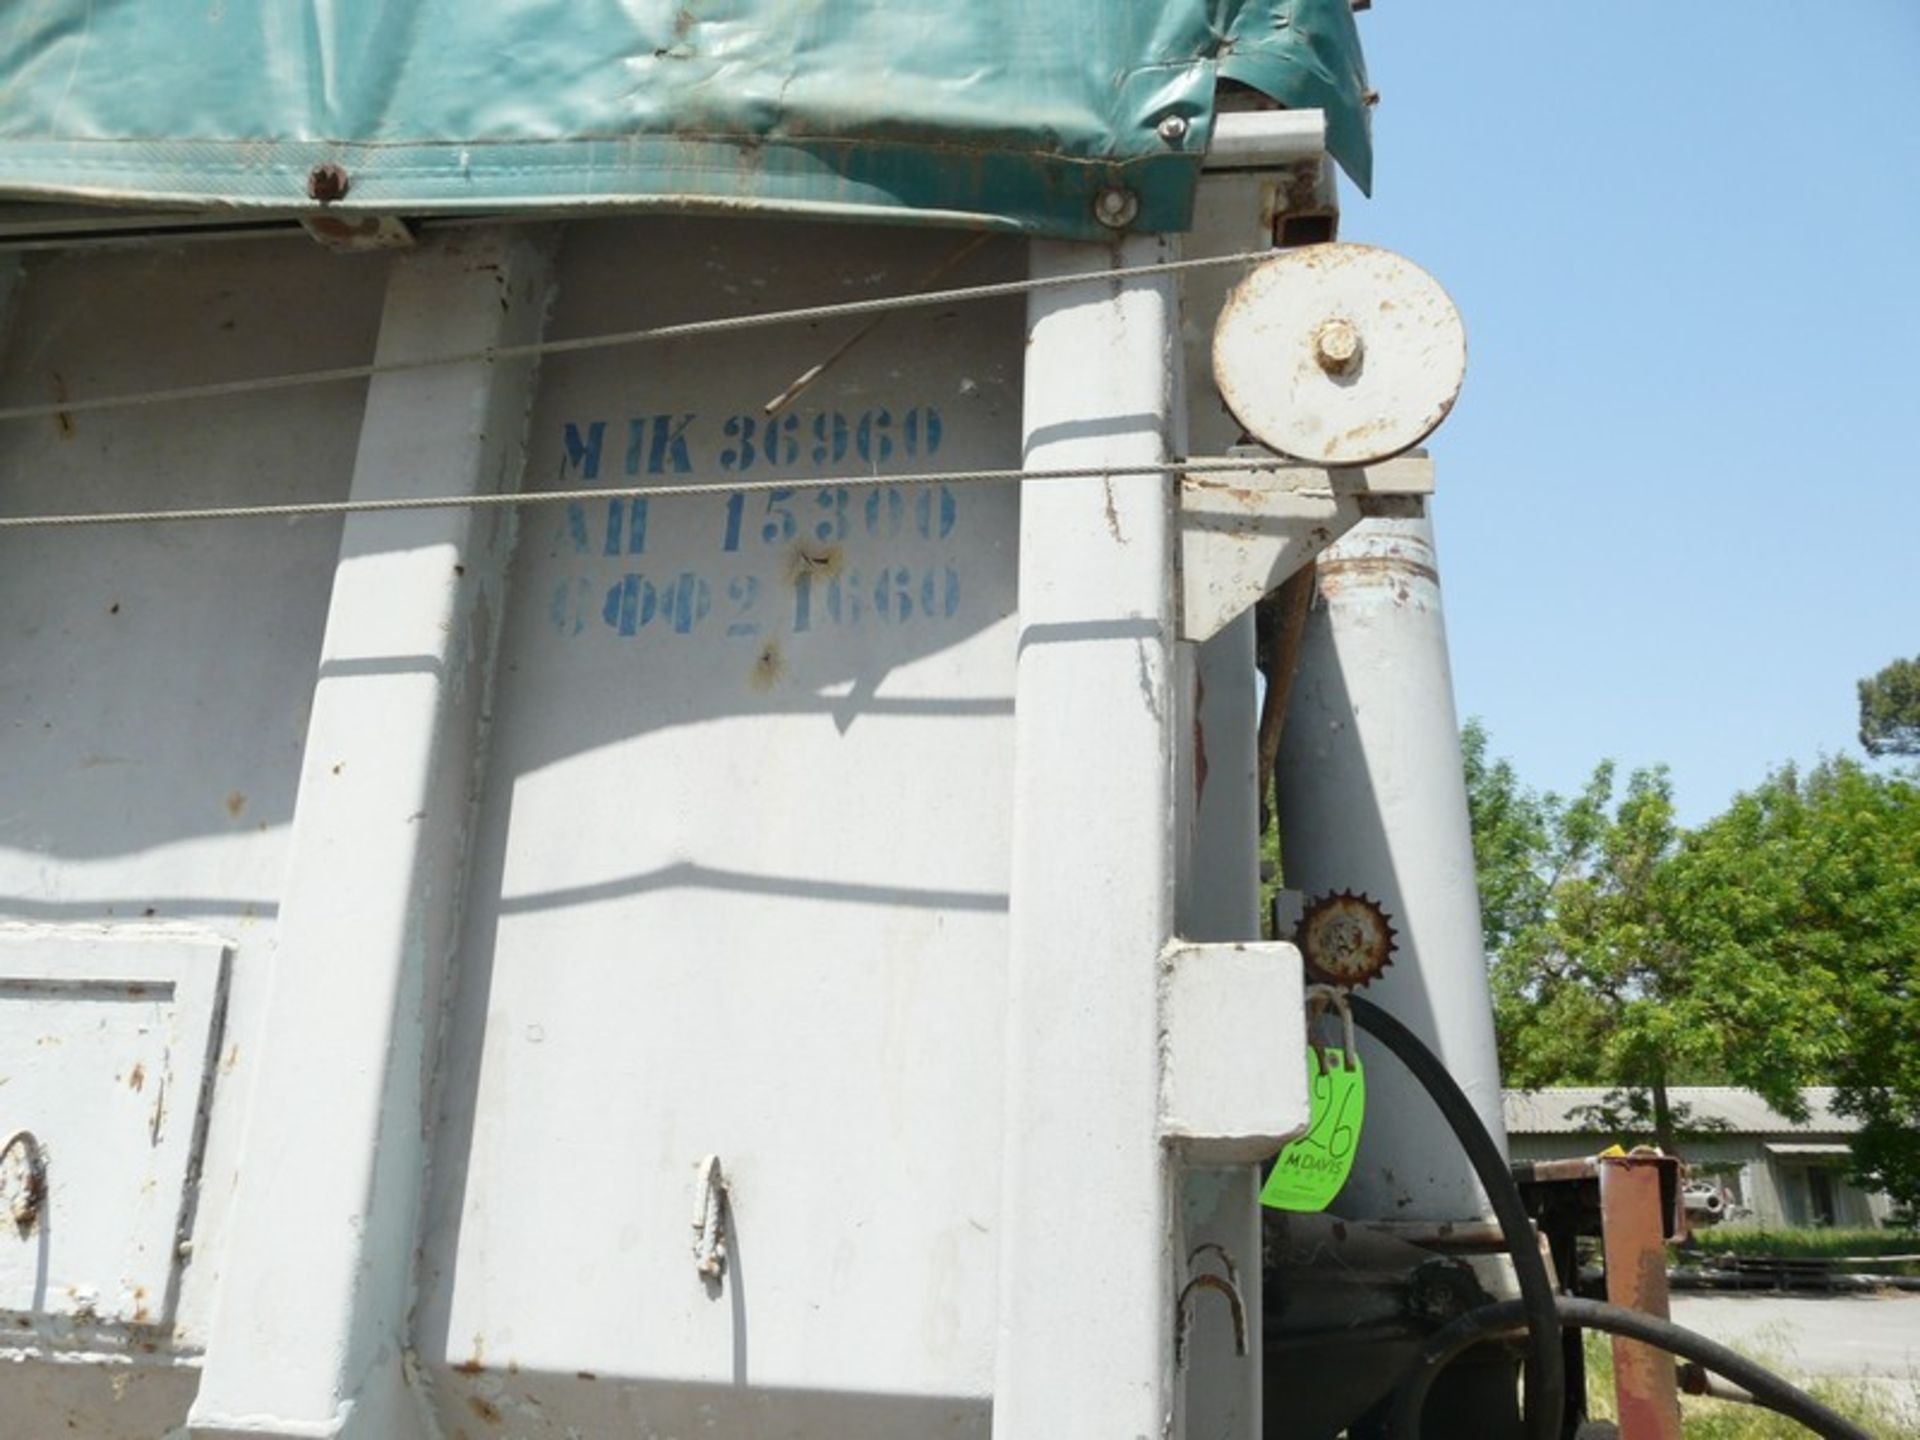 TRUCK WITH LIFTING FOR UNLOADING , SYSTEM FOR COVERING WITH CURTAIN (Located in Greece - Plati - Image 7 of 7